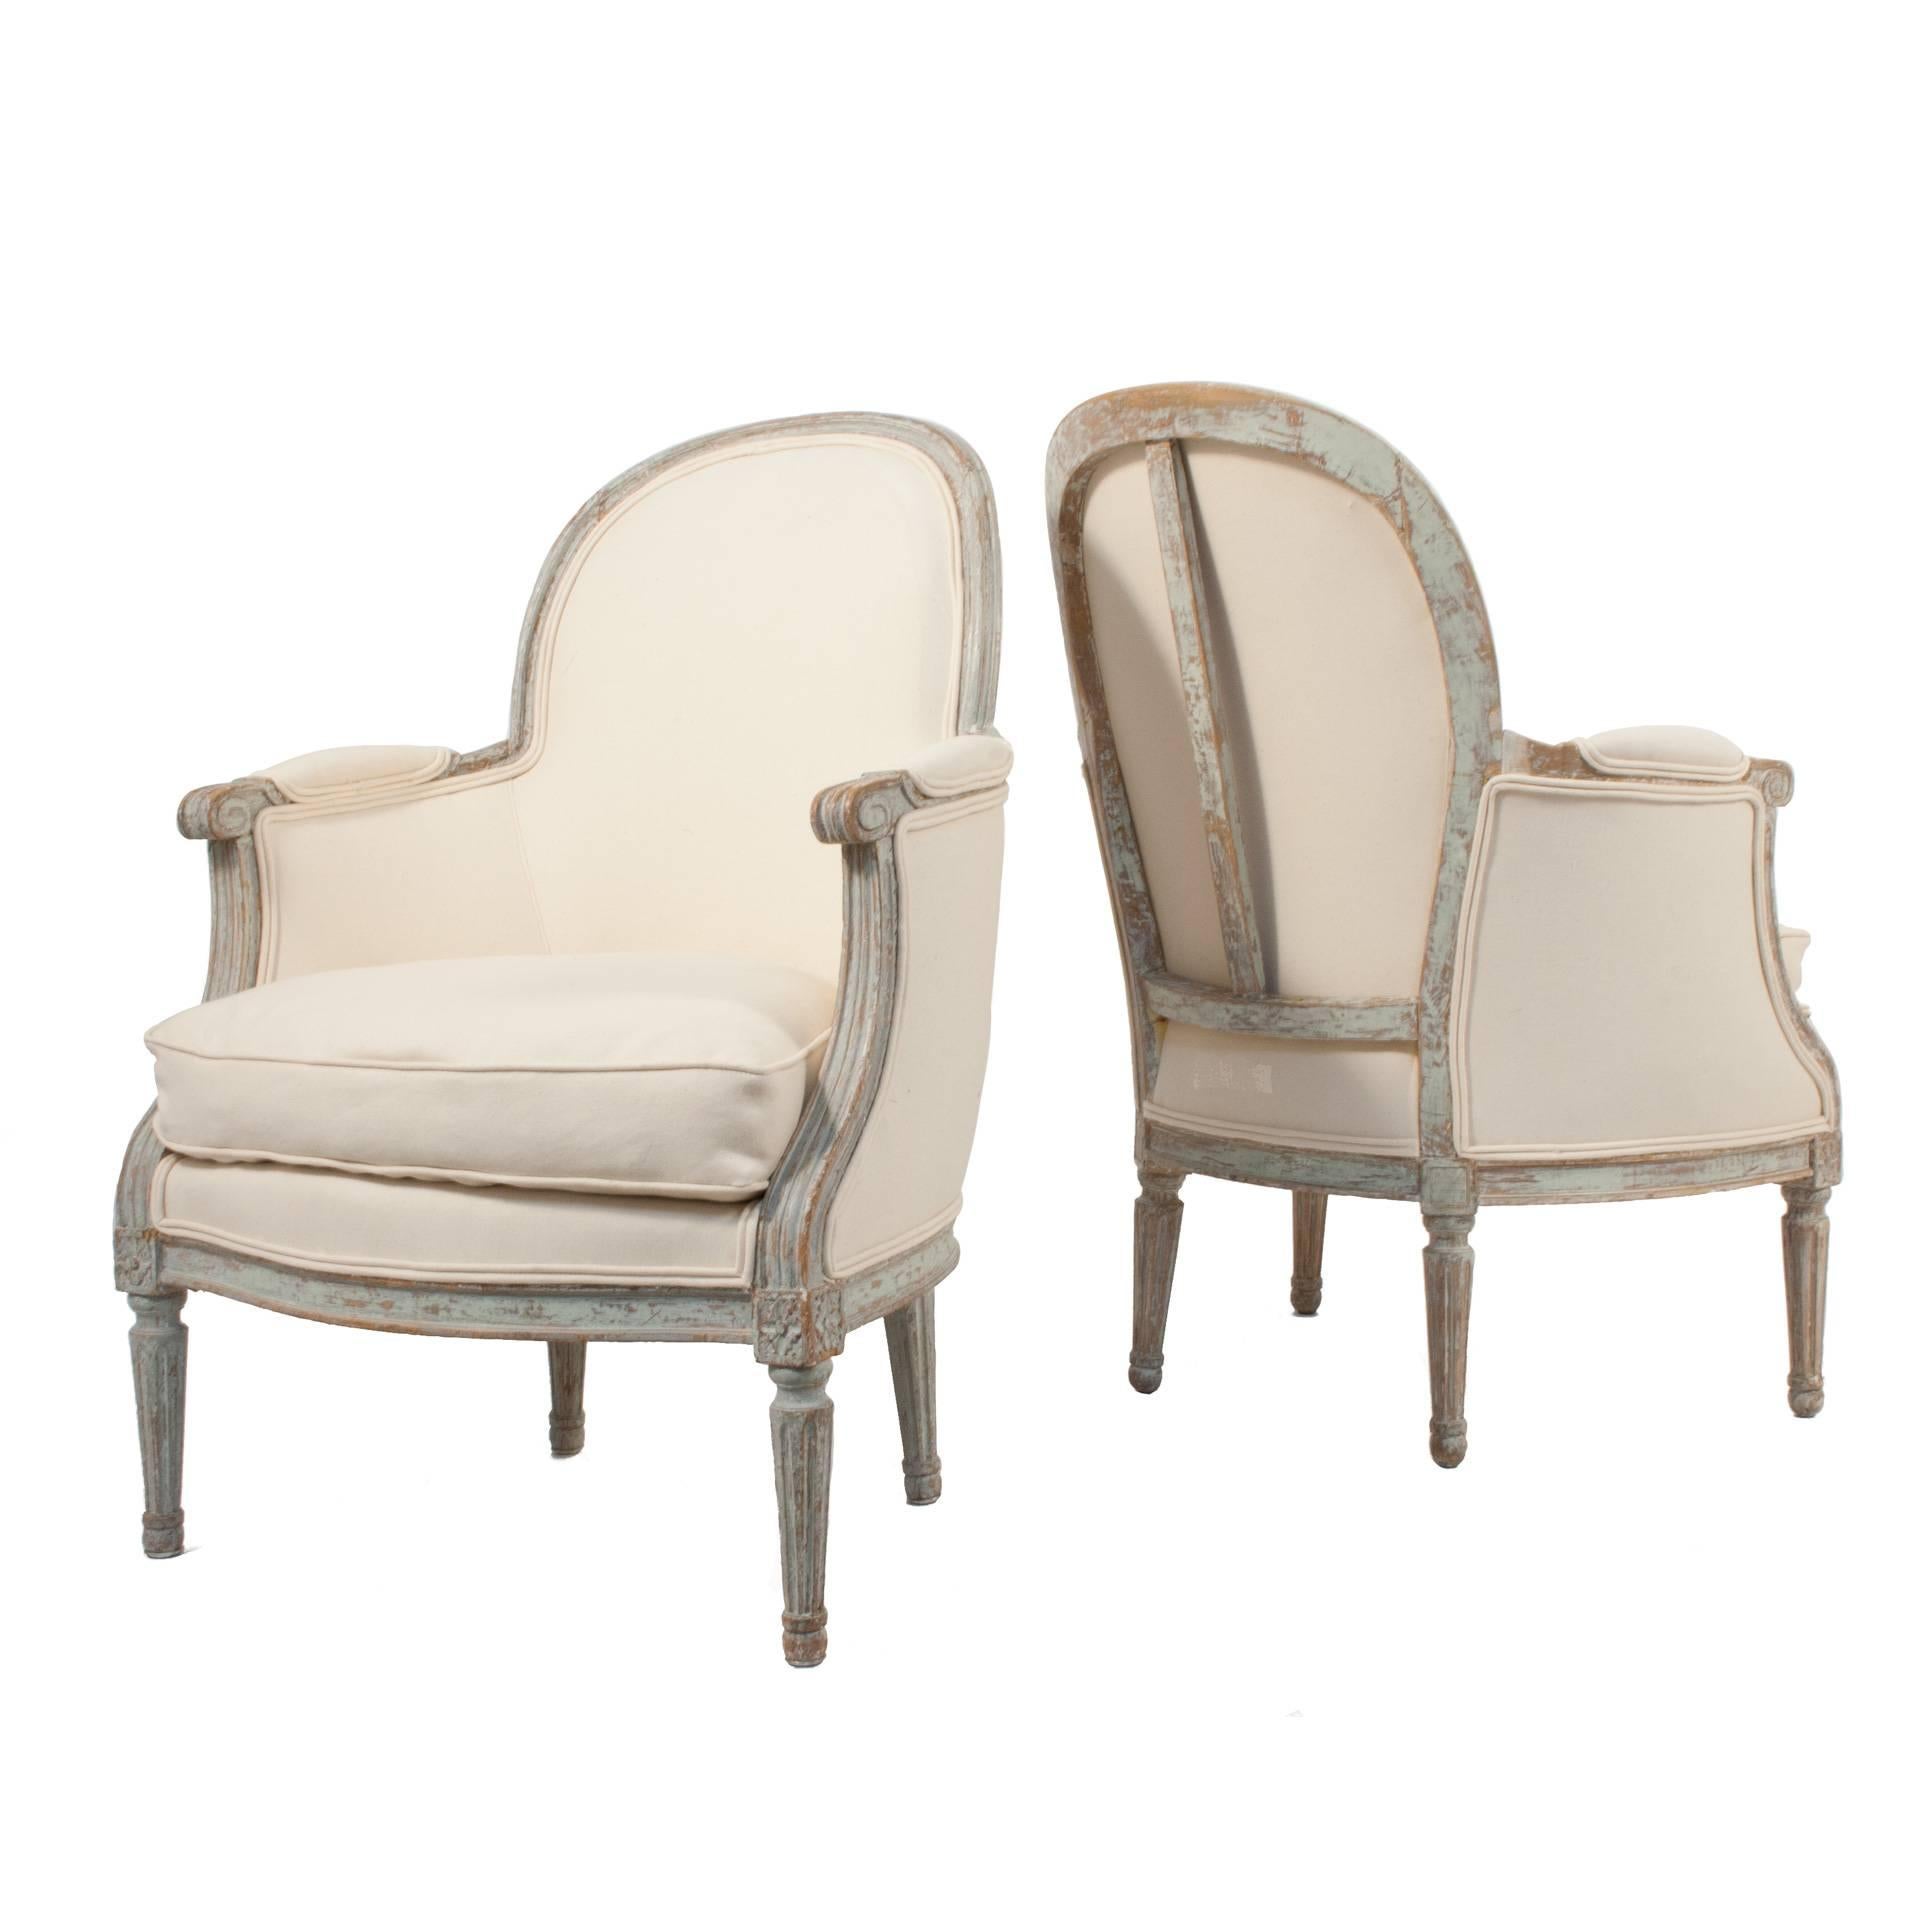 Pair of Gustavian Bergeres Chairs In Excellent Condition For Sale In Los Angeles, CA